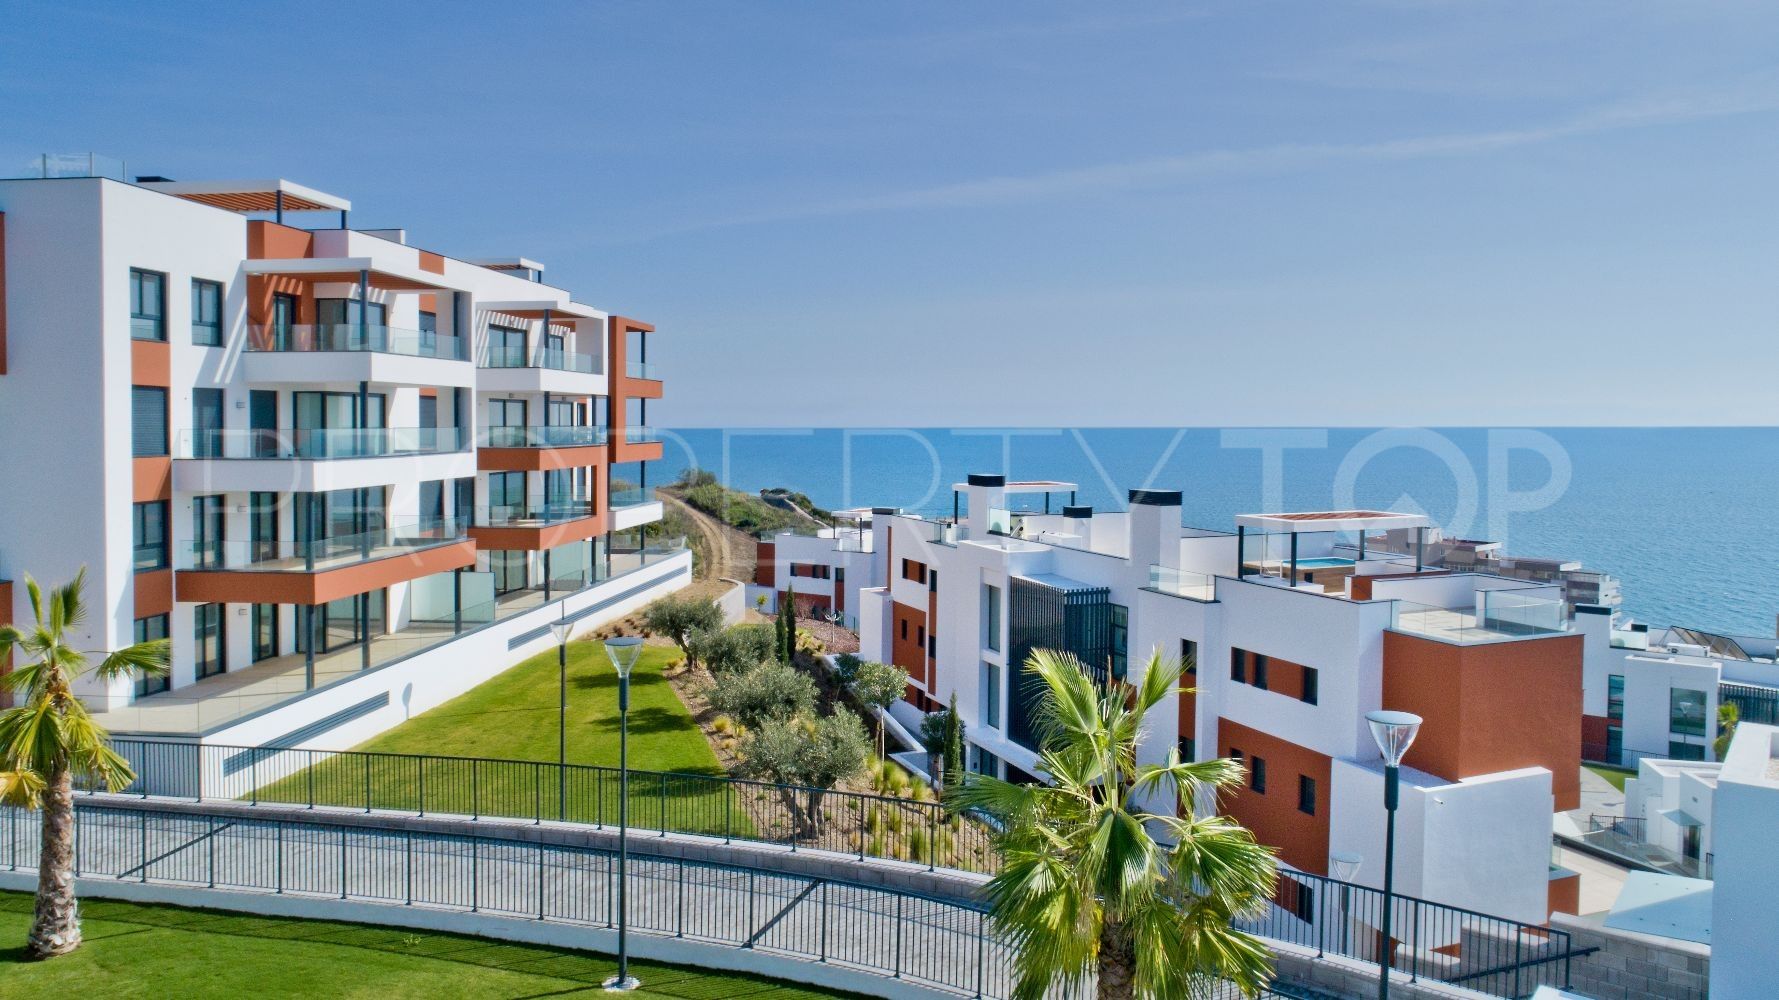 For sale apartment in Fuengirola with 2 bedrooms